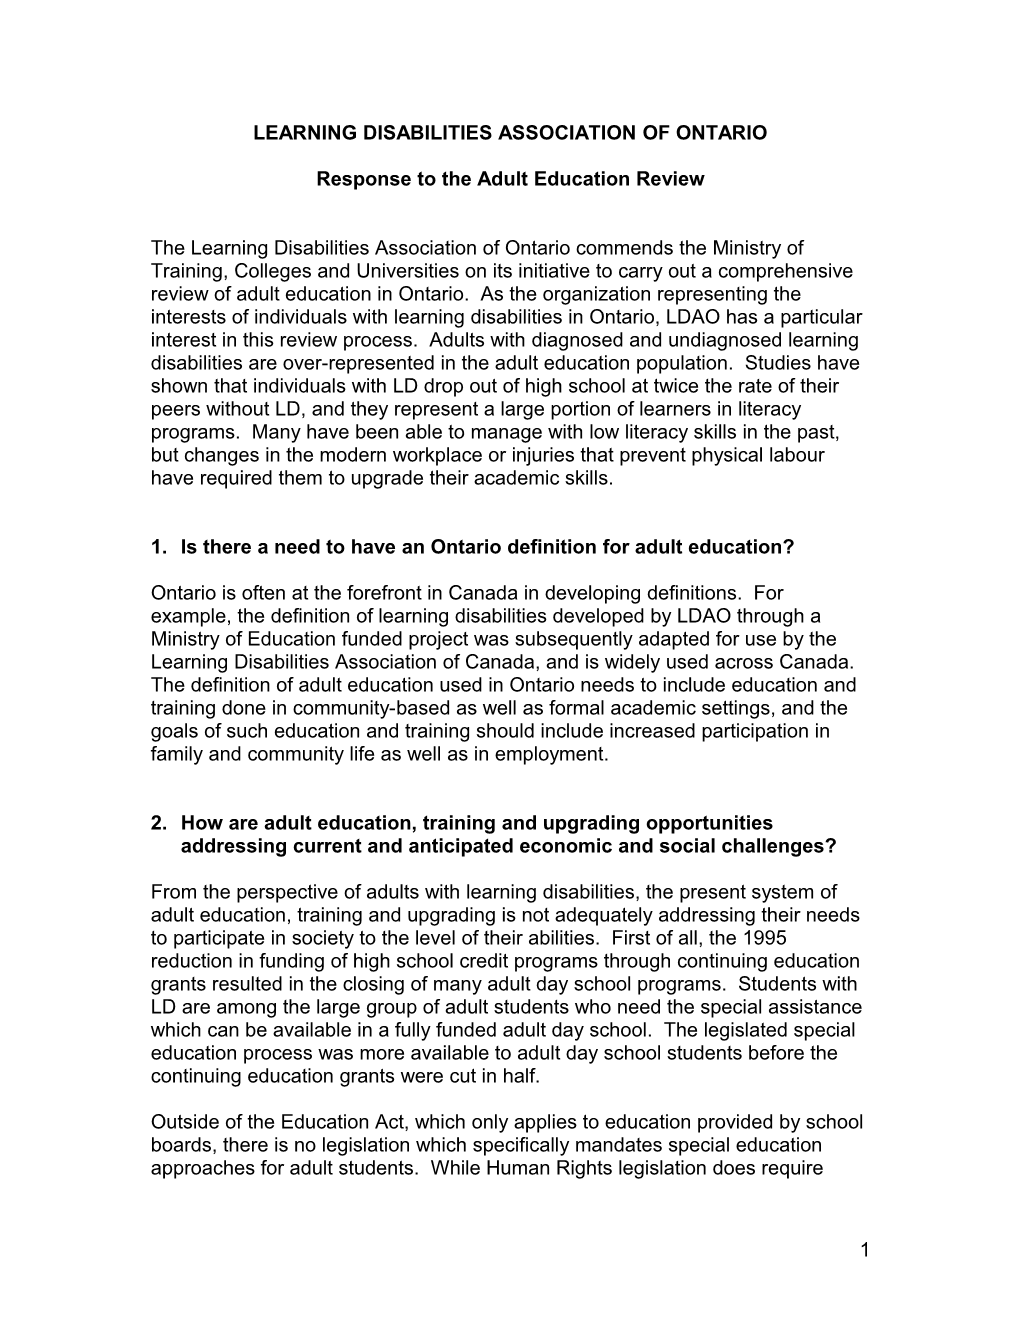 LDAO Response to the Adult Education Review